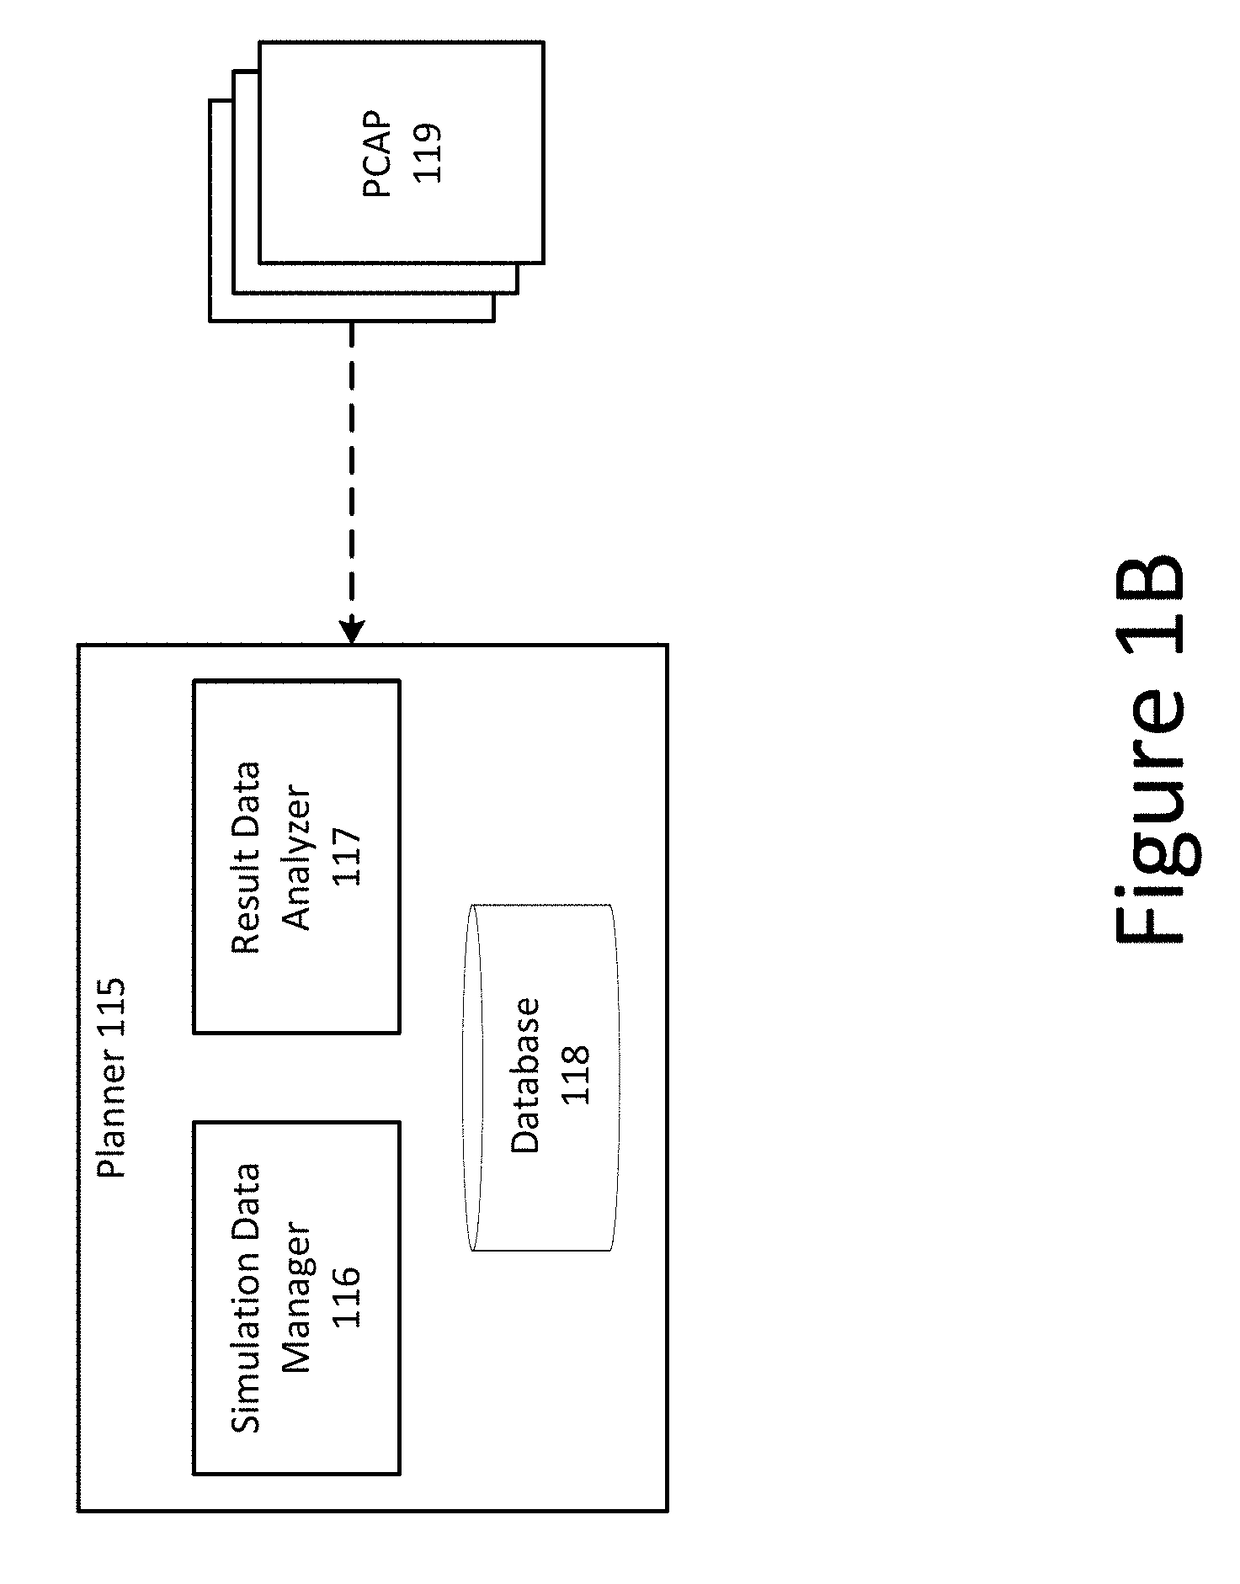 Systems and methods for attack simulation on a production network